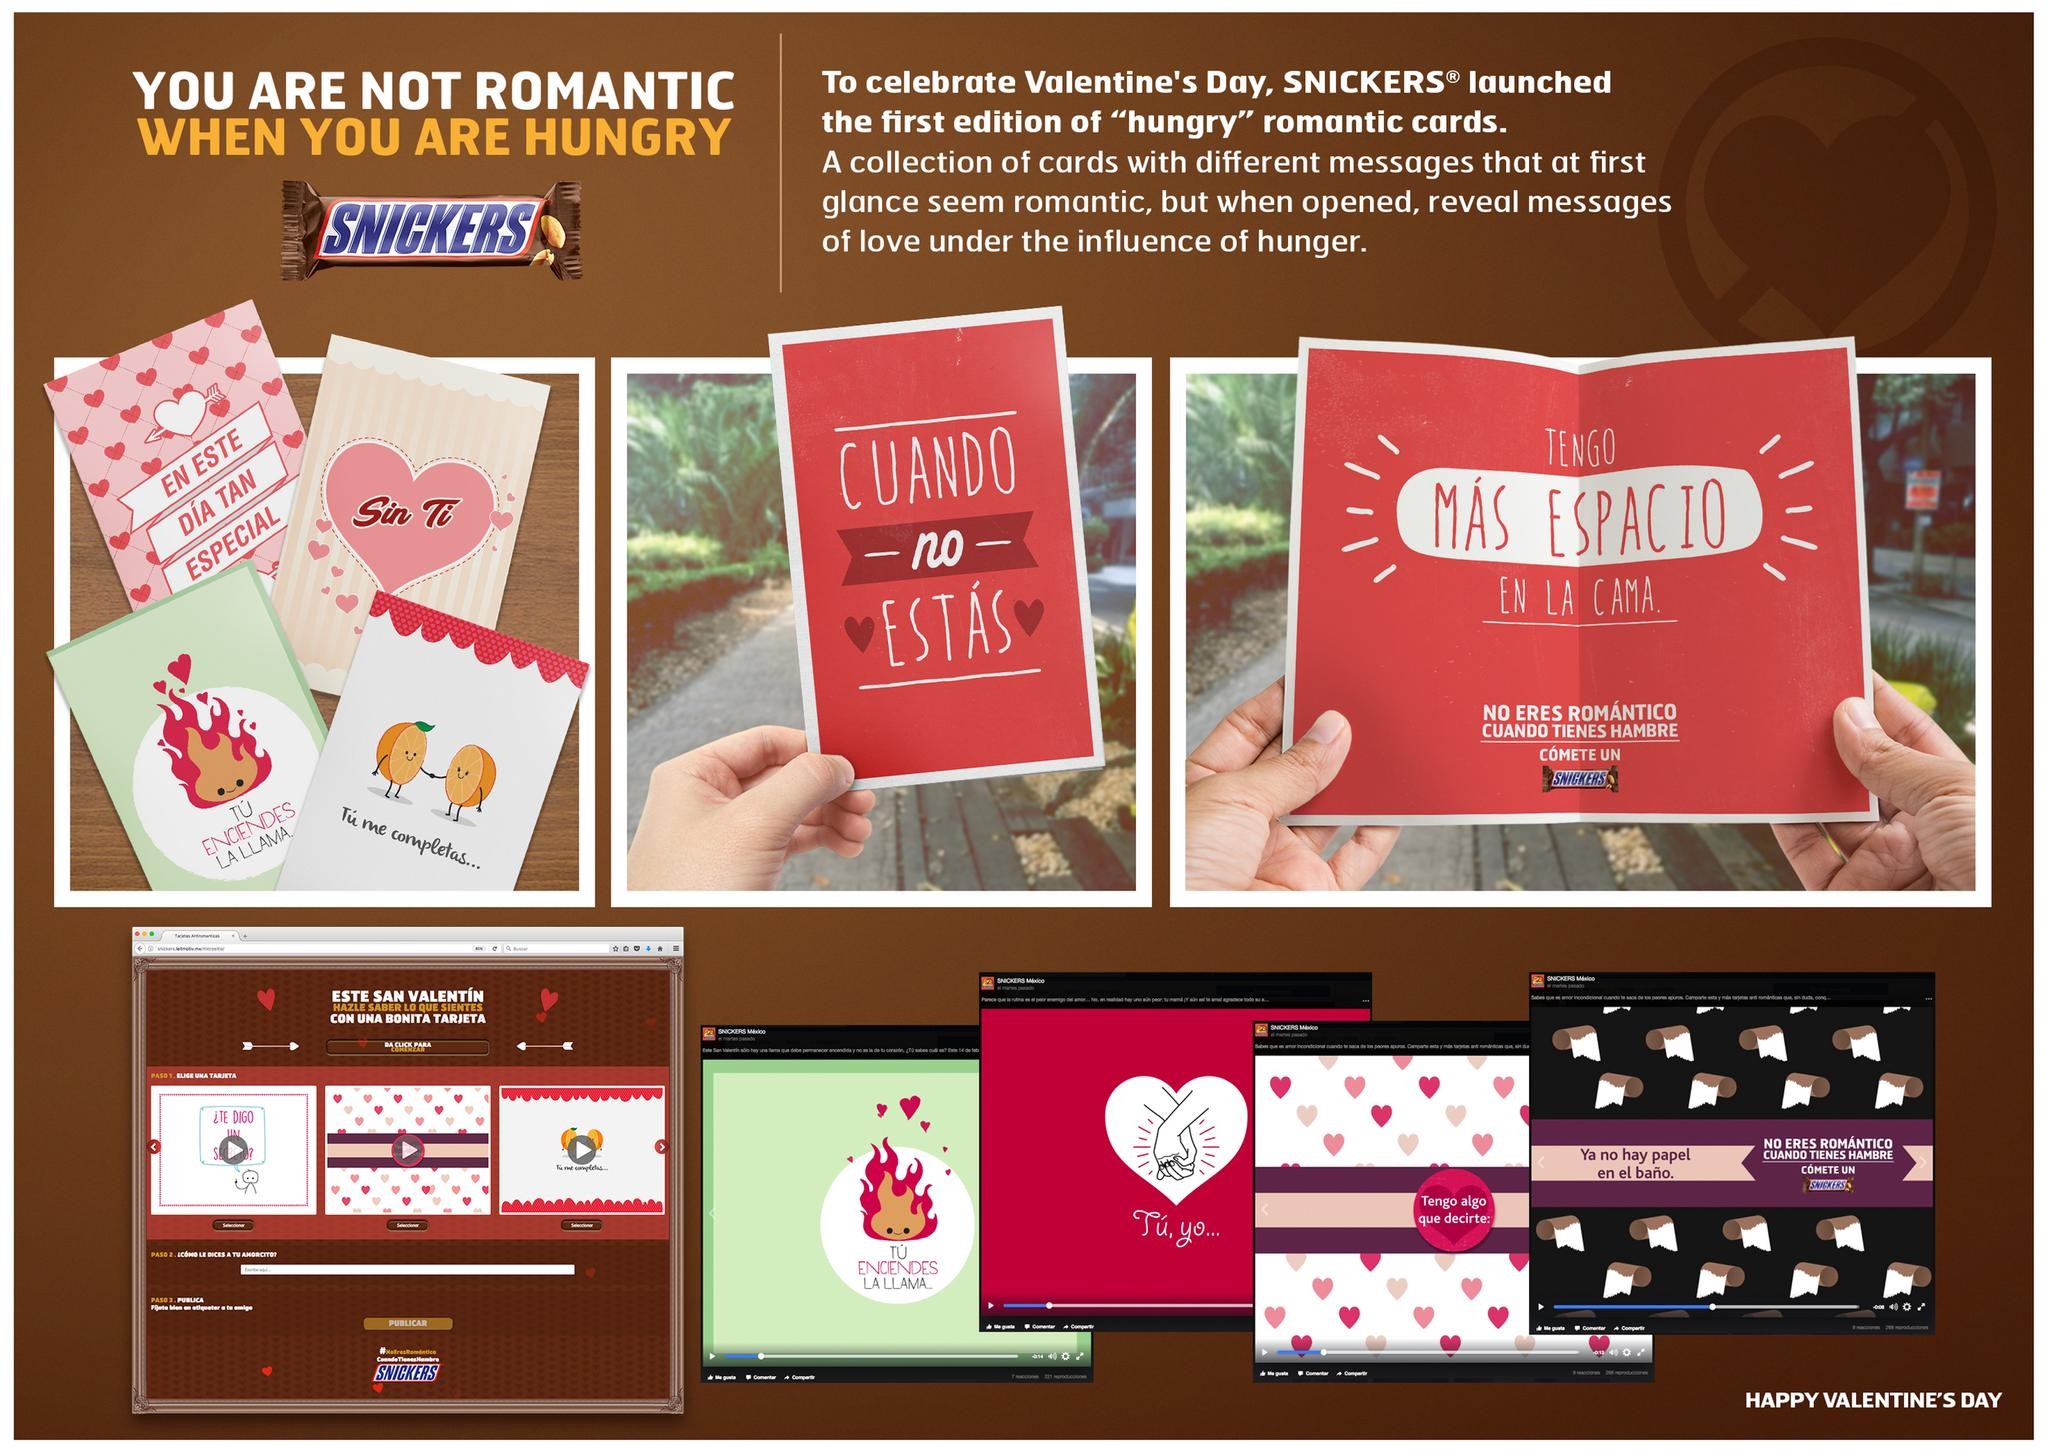 Hungry Romantic Cards